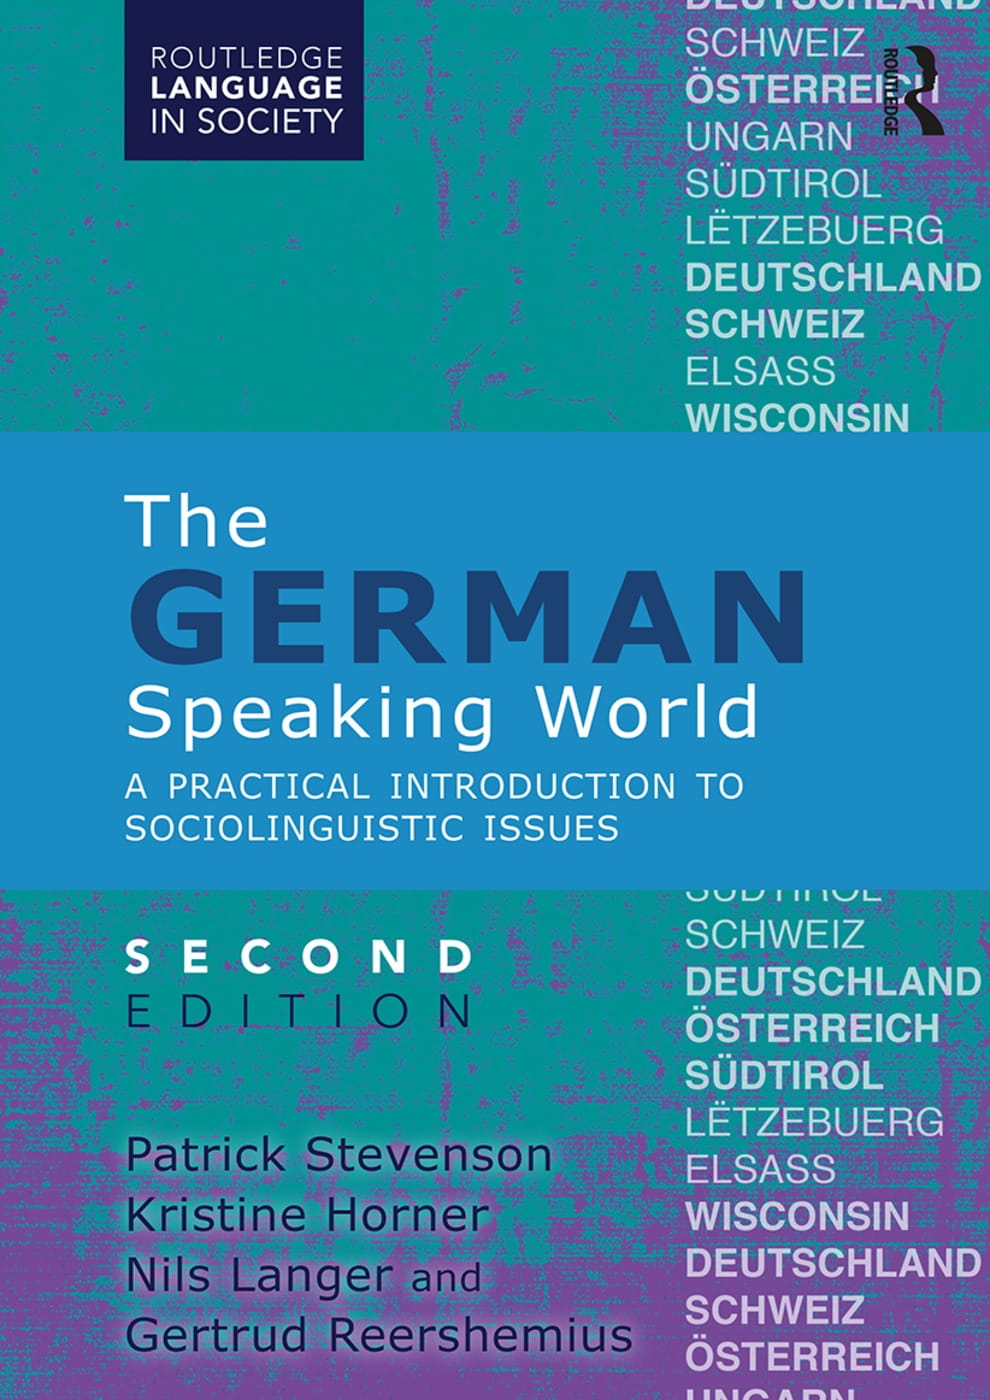 The German-Speaking World: A Practical Introduction to Sociolinguistic Issues